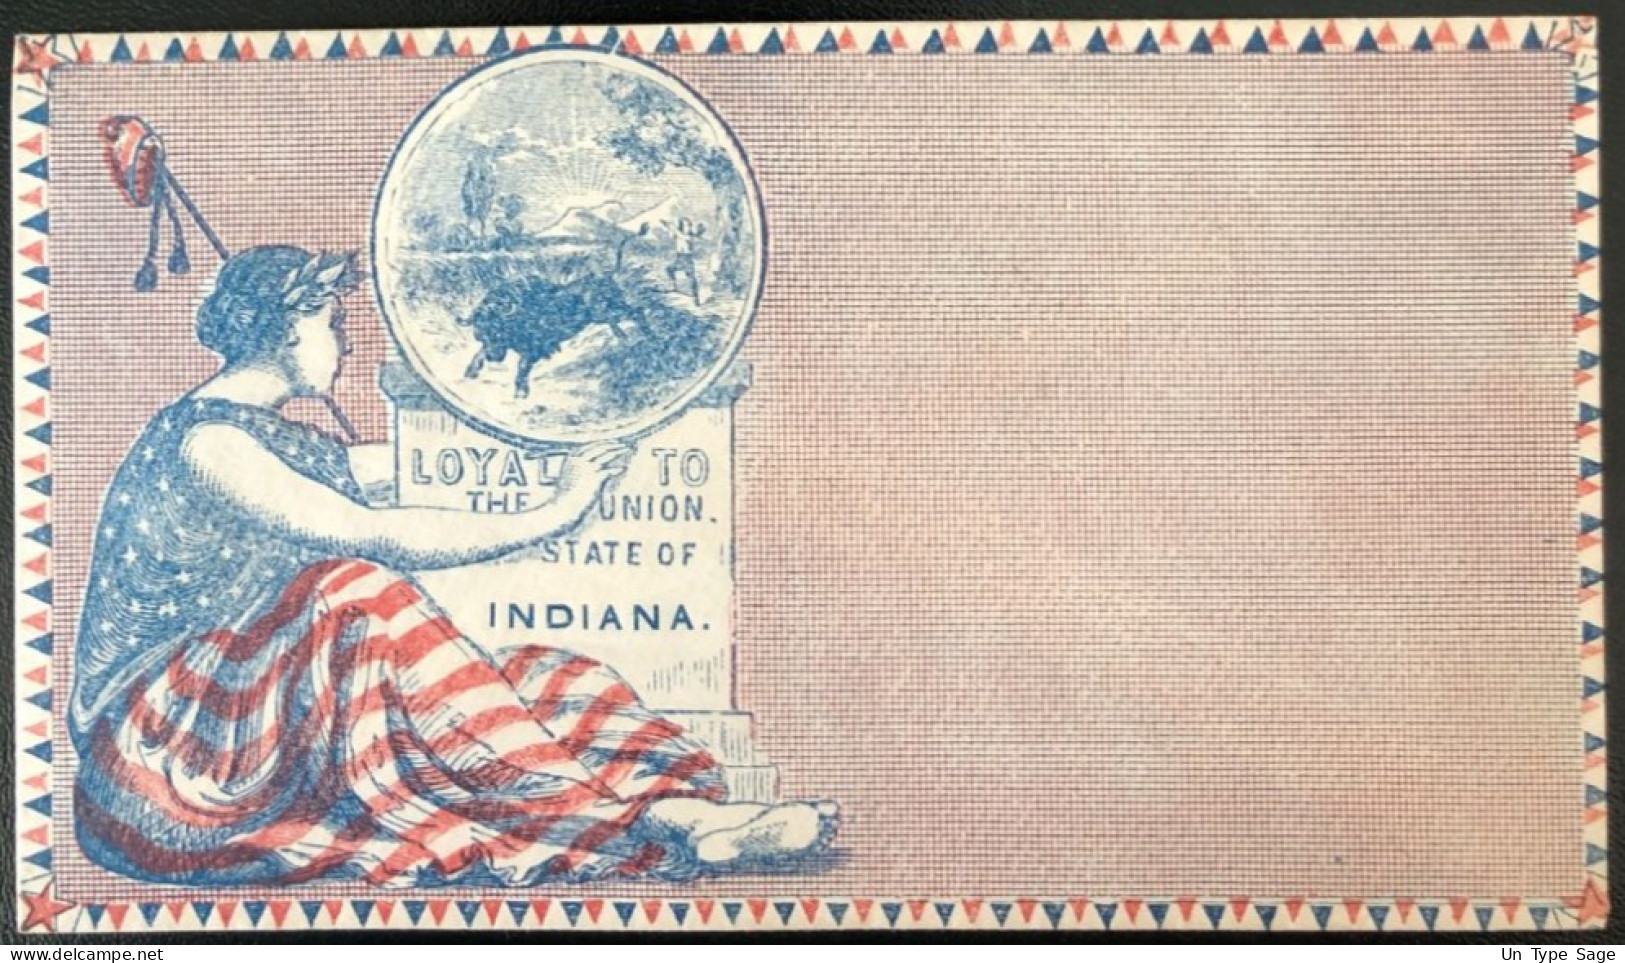 U.S.A, Civil War, Patriotic Cover - "Loyal To The Union. State Of INDIANA" - Unused - (C457) - Postal History